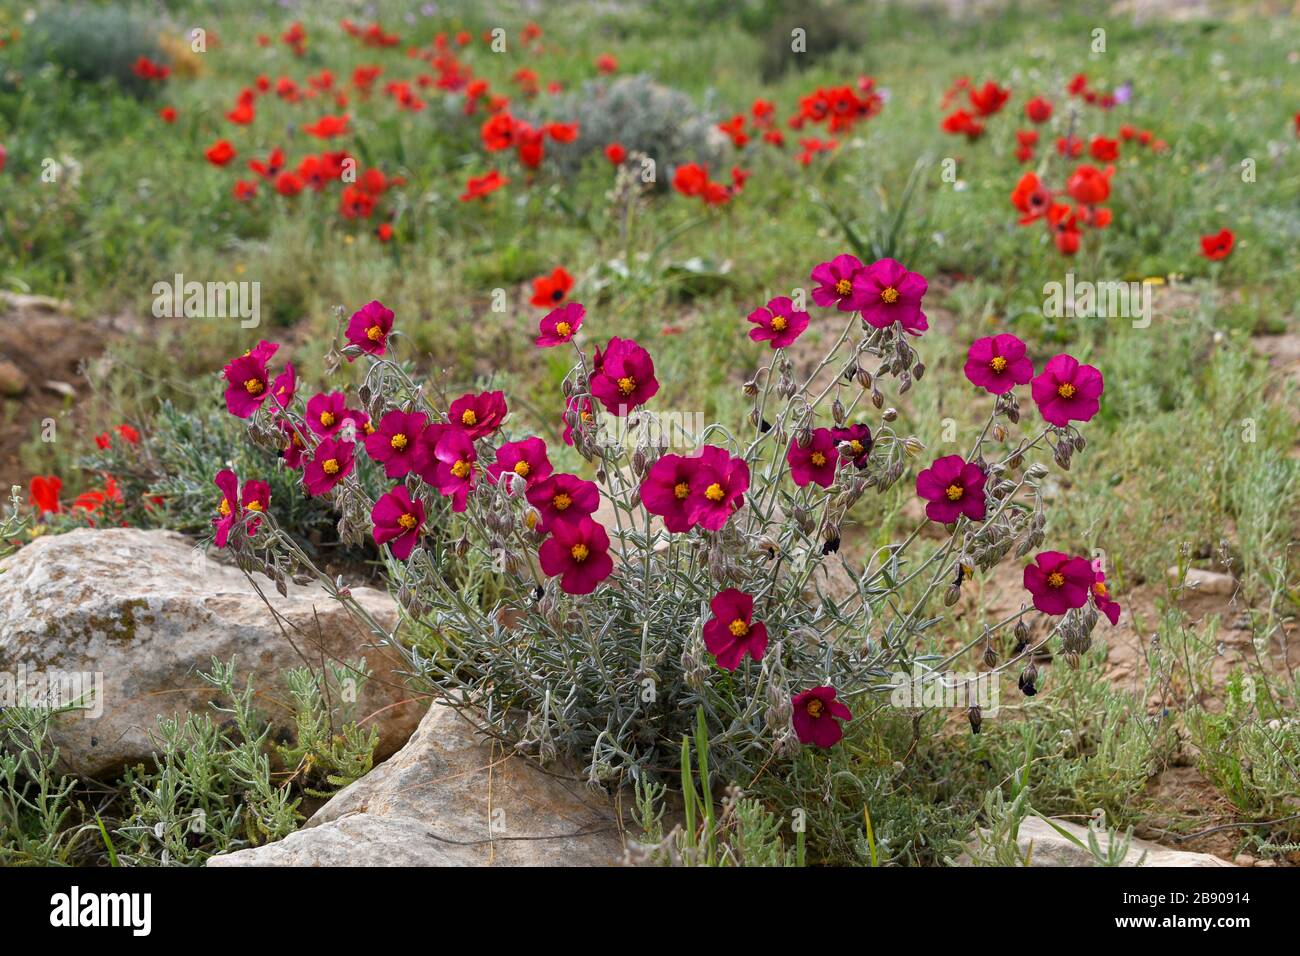 Helianthemum [here Helianthemum vesicarium]  known as rock rose, sunrose, rushrose, or frostweed, a flowering plant in the family Cistaceae. They are Stock Photo